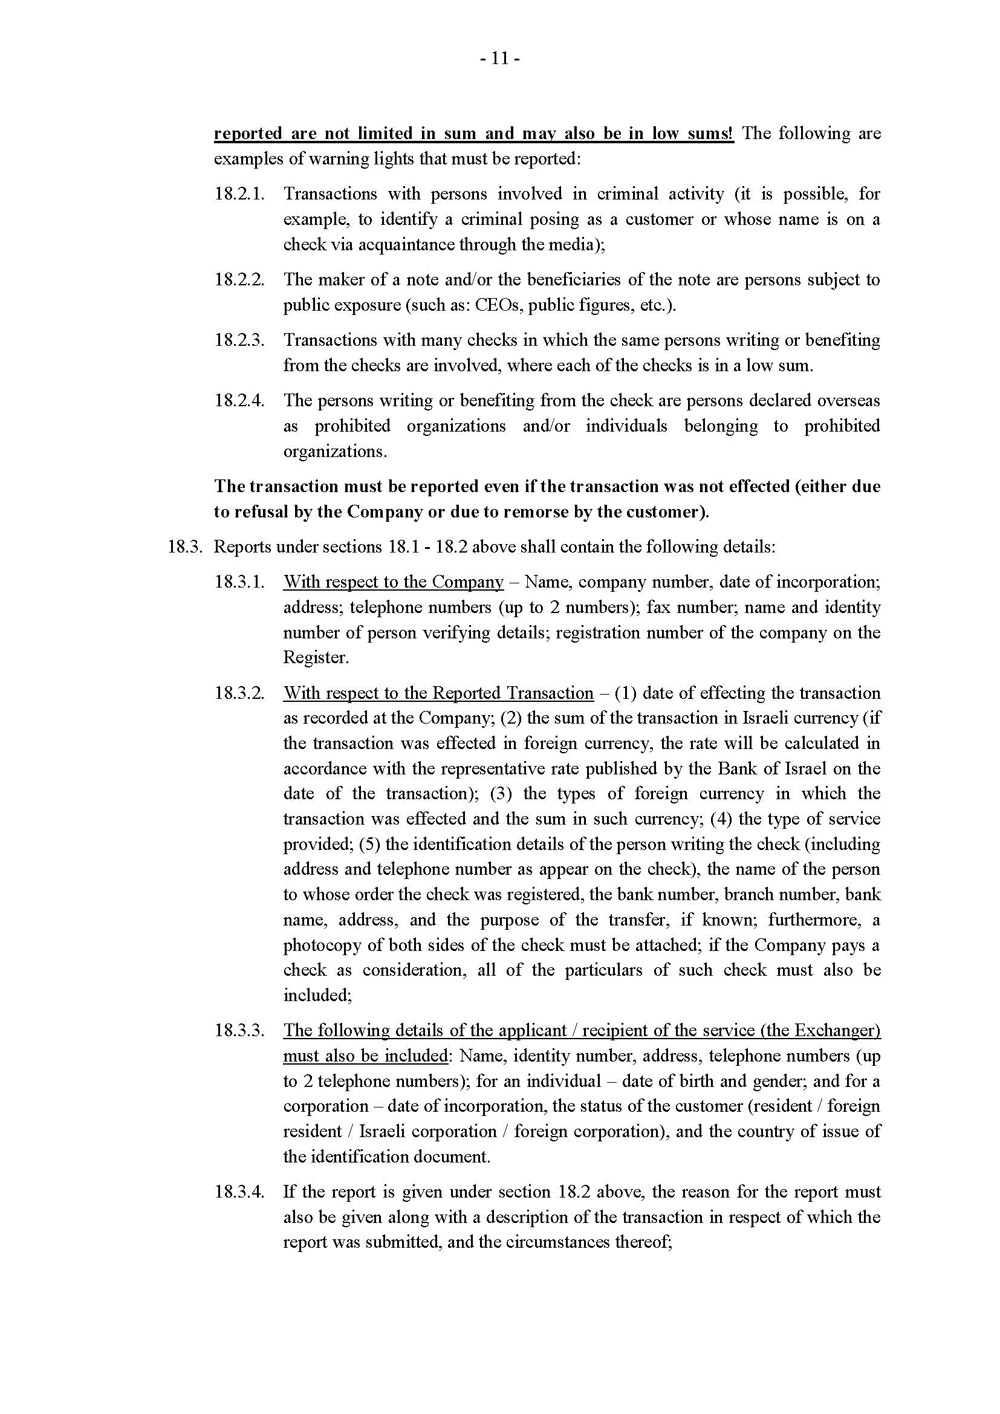 Biteach Compliance Plan - Money Laundering Law English_Page_11